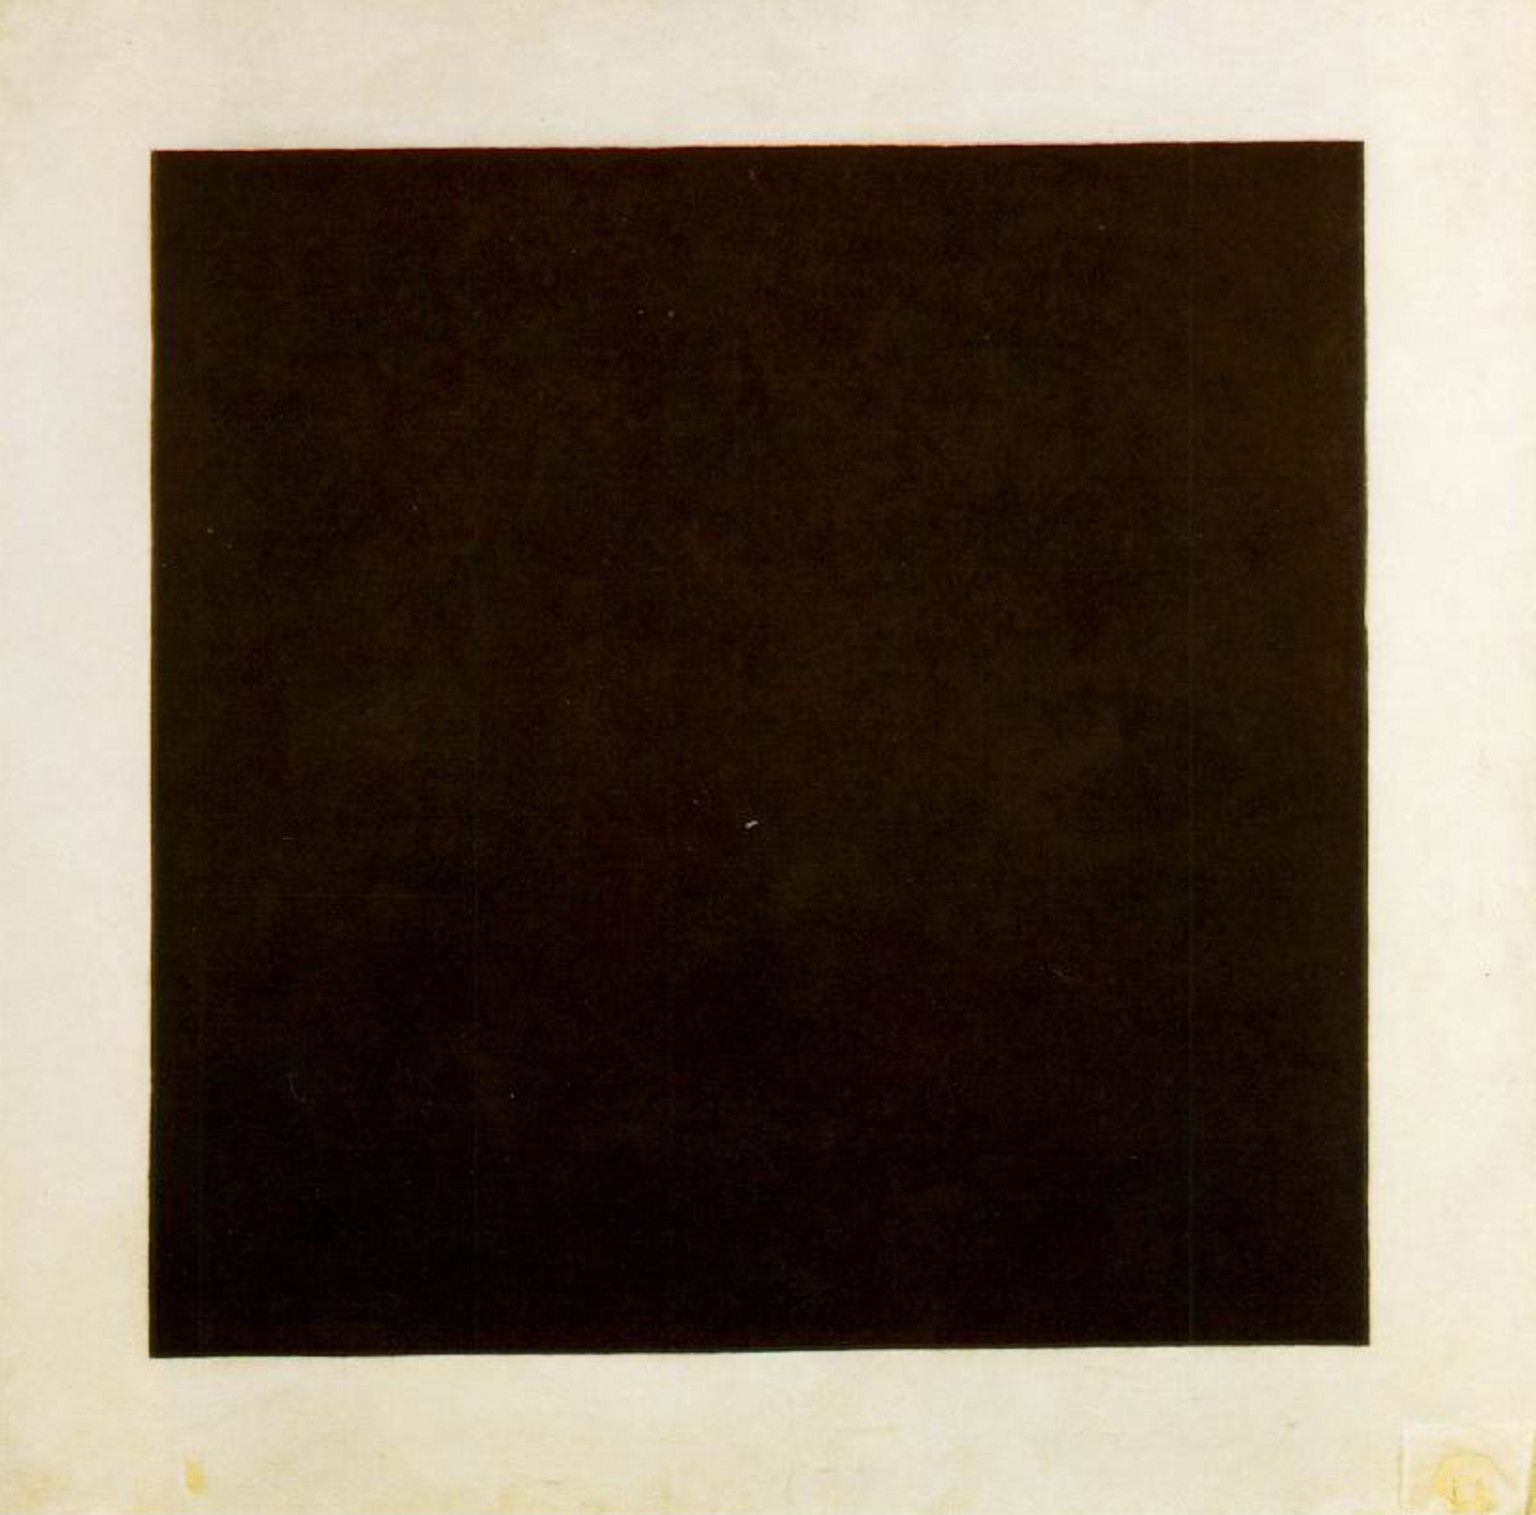 Philip Shaw, 'Kasimir Malevich's Black Square' (The Art of the